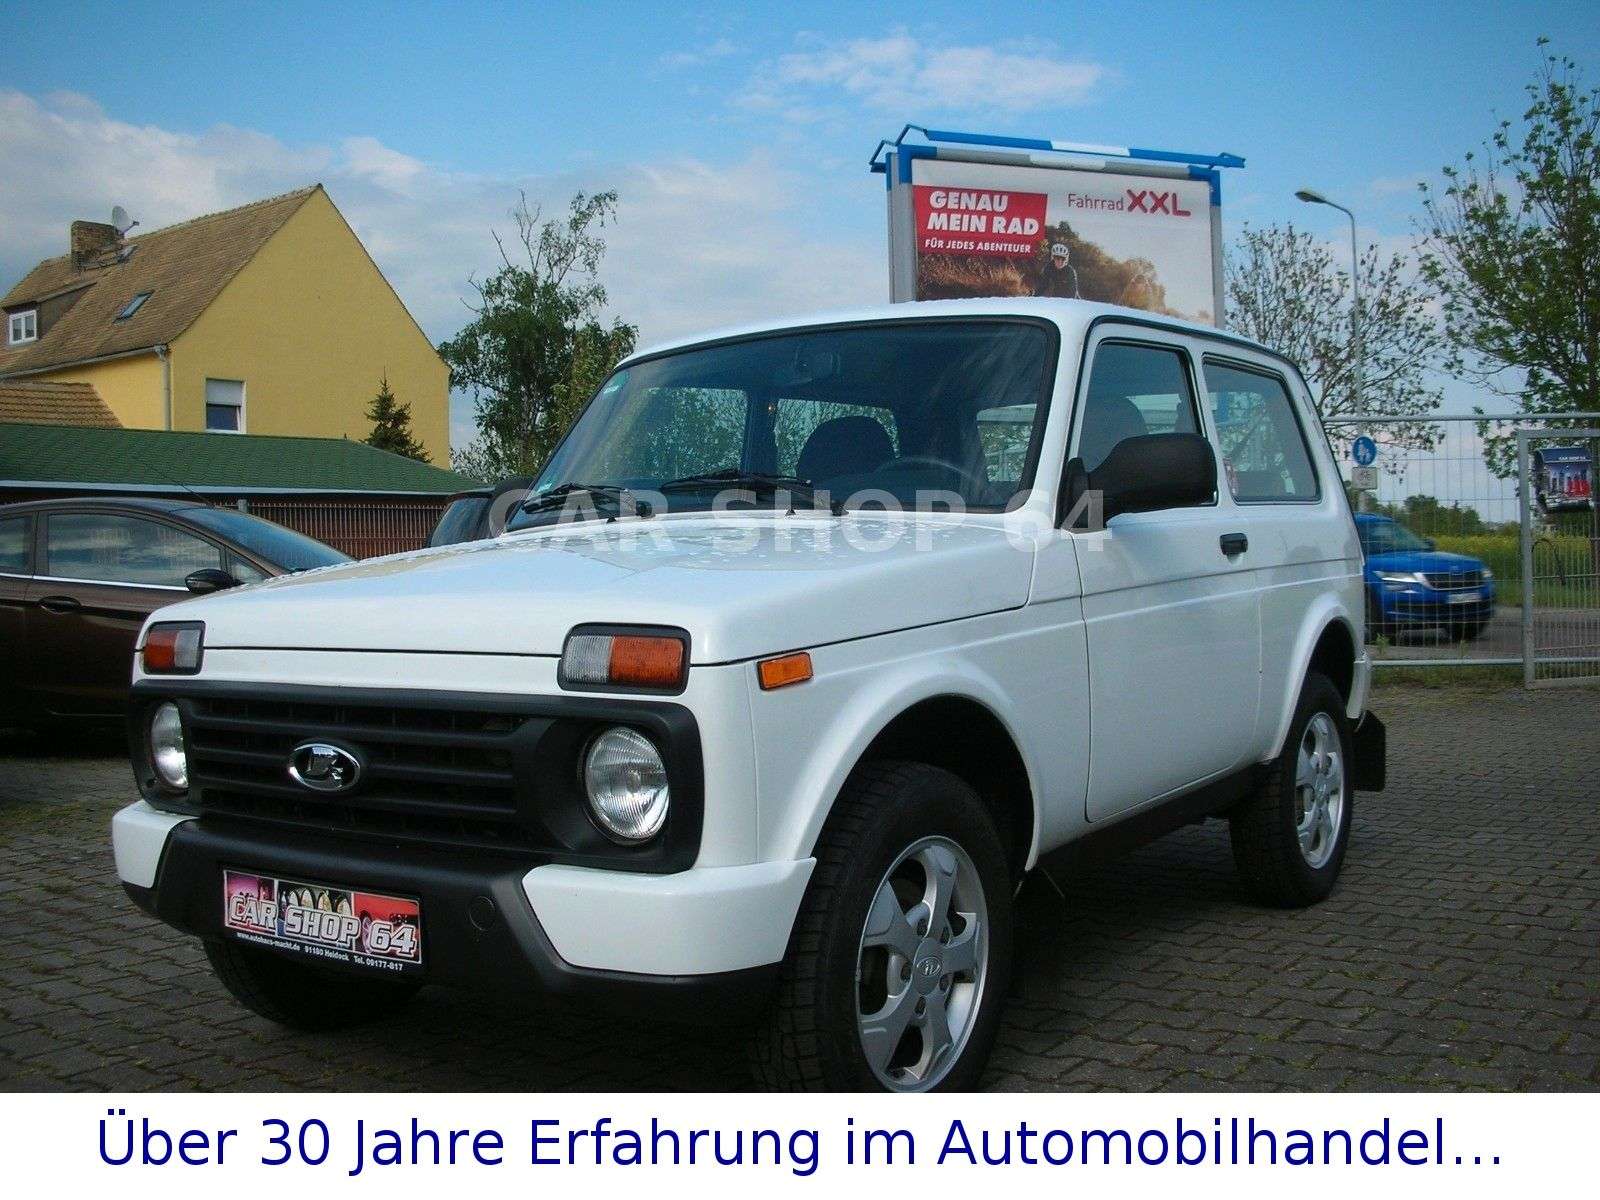 Lada Niva Off-Road/Pick-up in White used in Halle for € 11,900.-